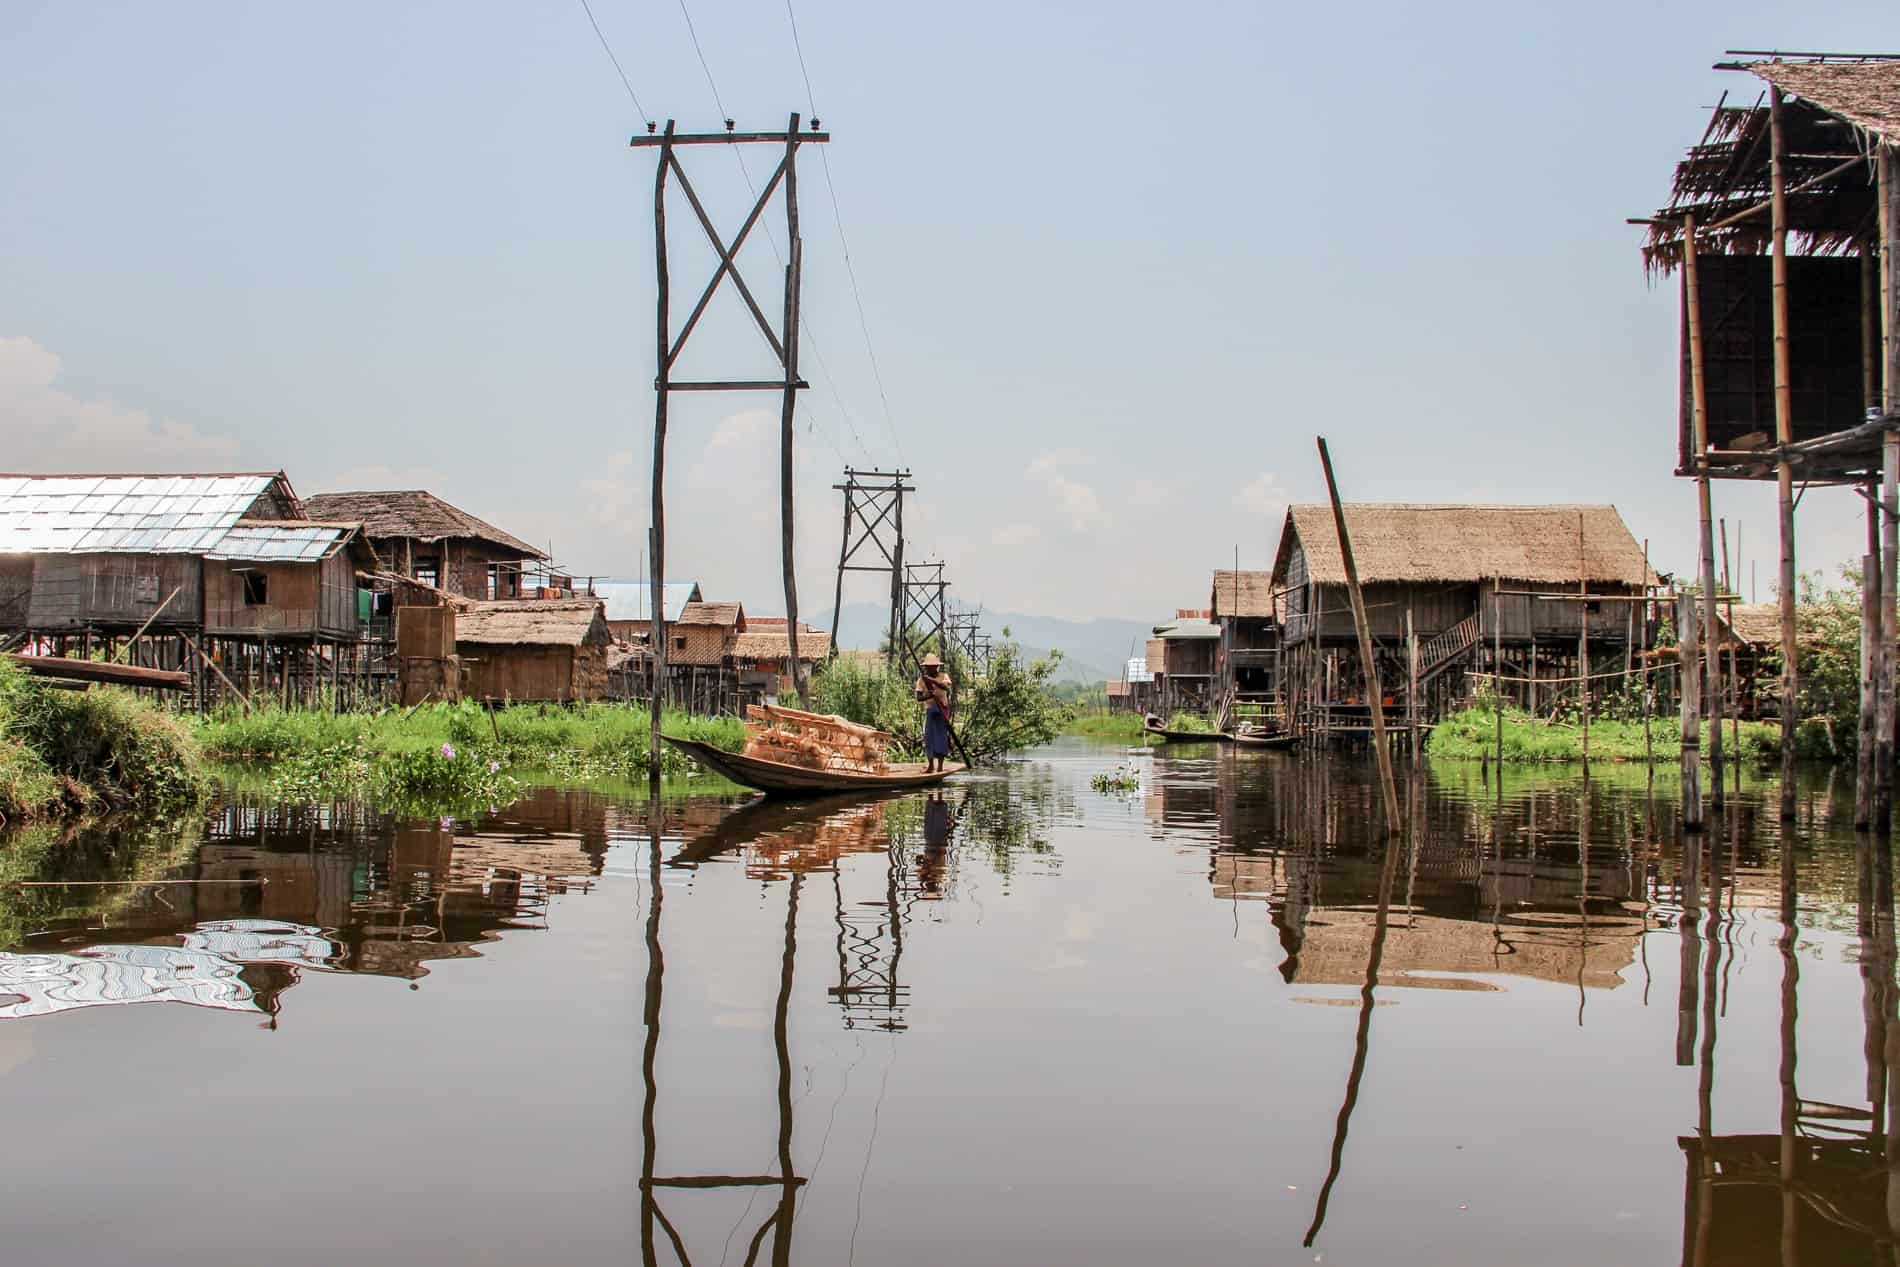 A man rows a long wooden boats through waters lined with bamboo stilt houses belonging to the Intha people of Inle Lake.